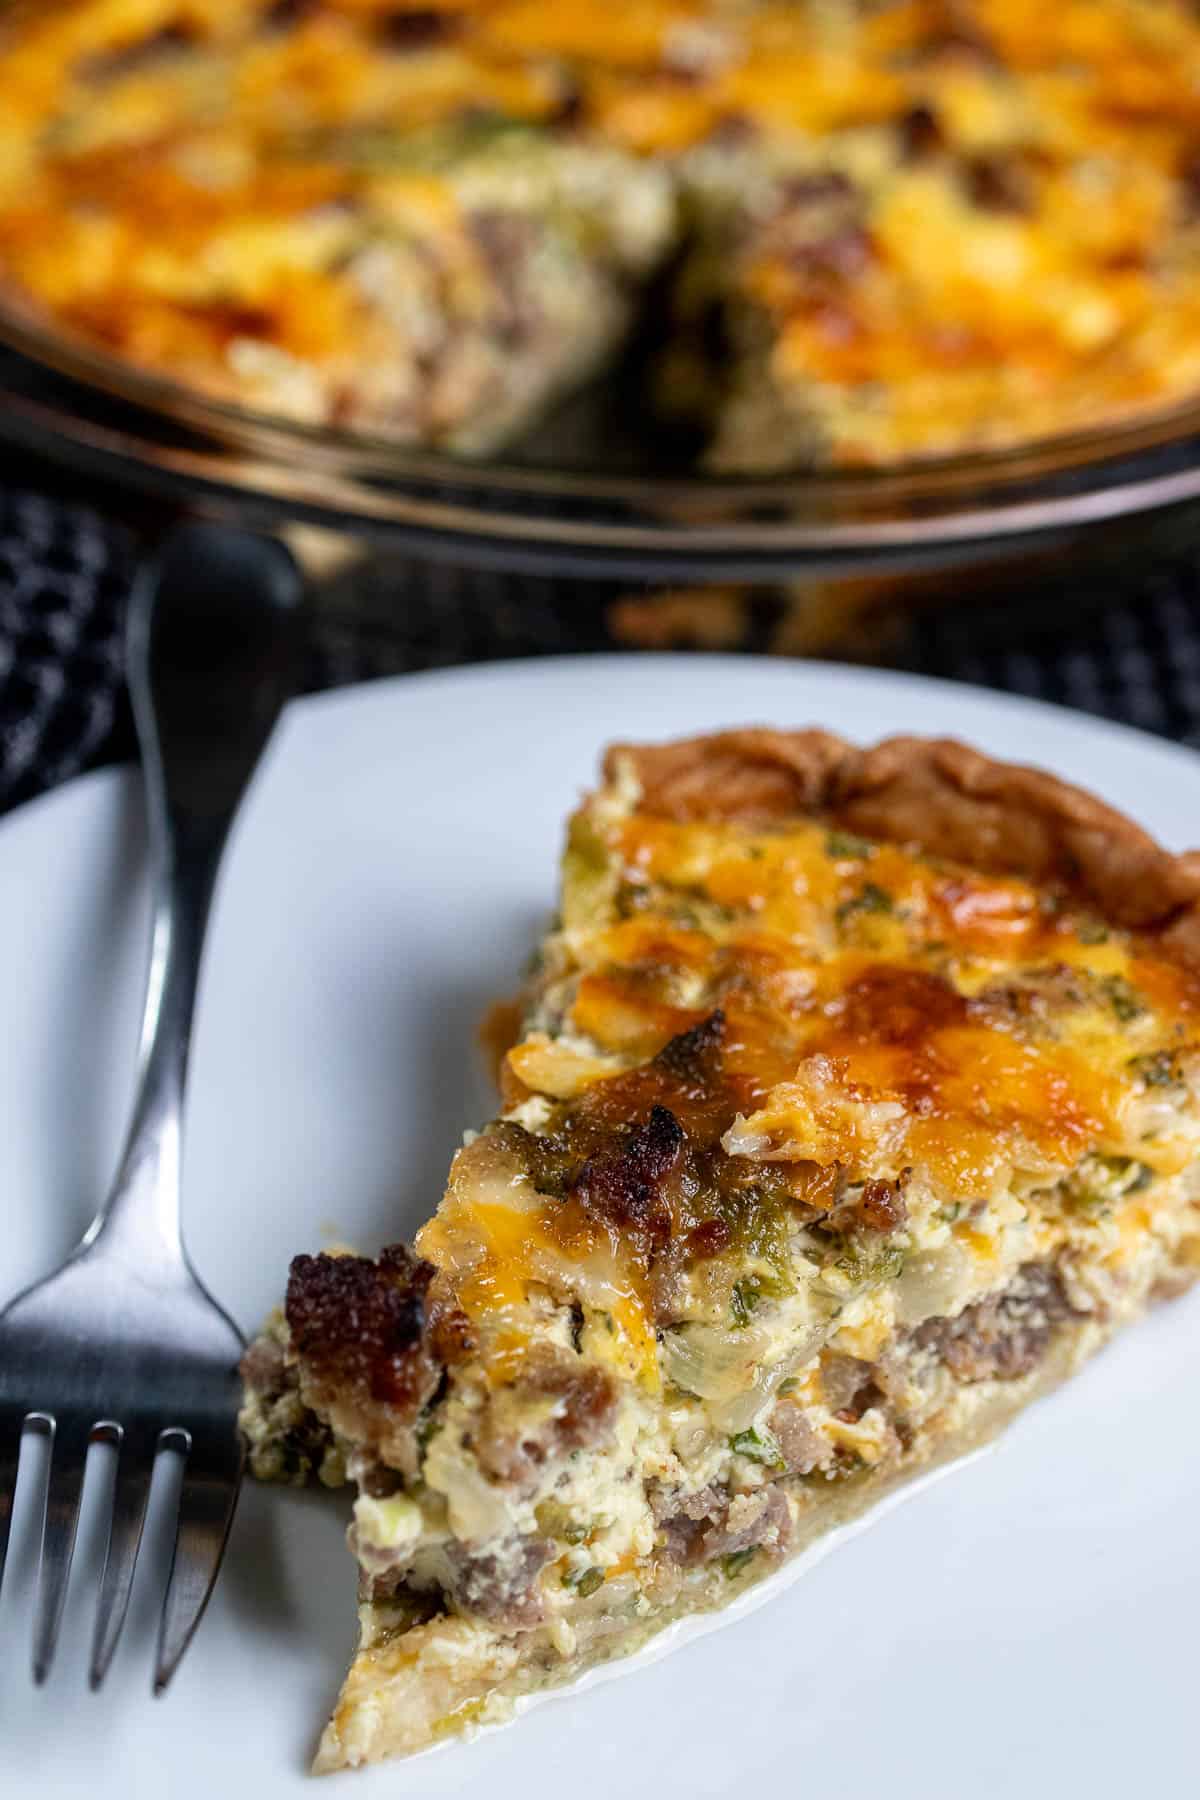 Angled view of green chile and sausage quiche in a glass pie dish with a slice on a white plate in front of it.